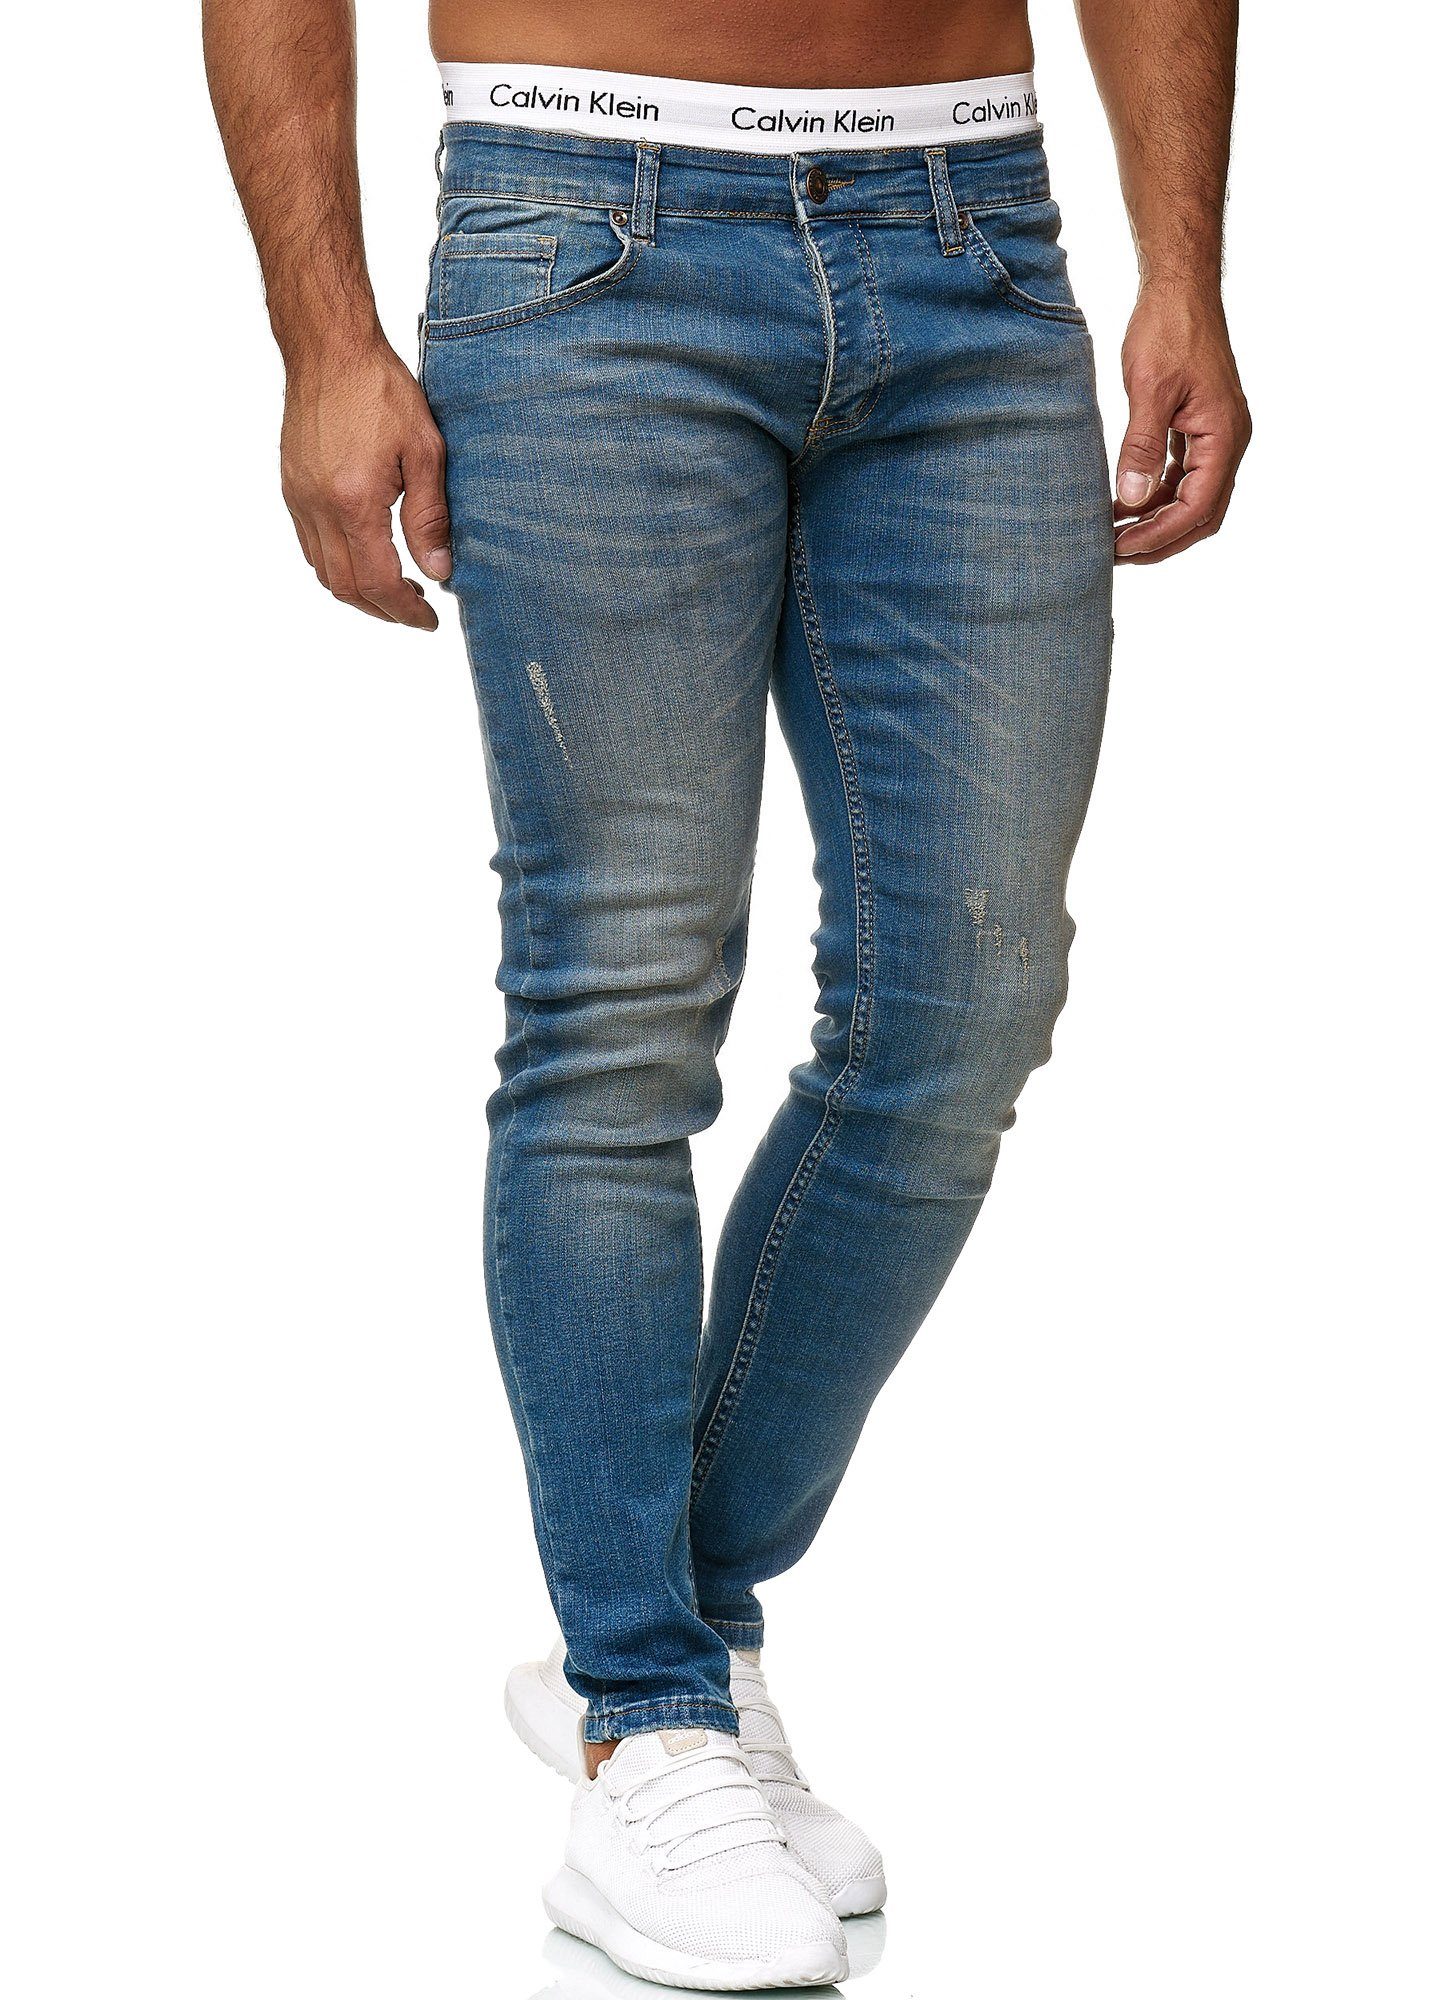 613 Freizeit Business Casual OneRedox Bootcut, 1-tlg) (Jeanshose Designerjeans Blue 600JS Straight-Jeans Used Dirty